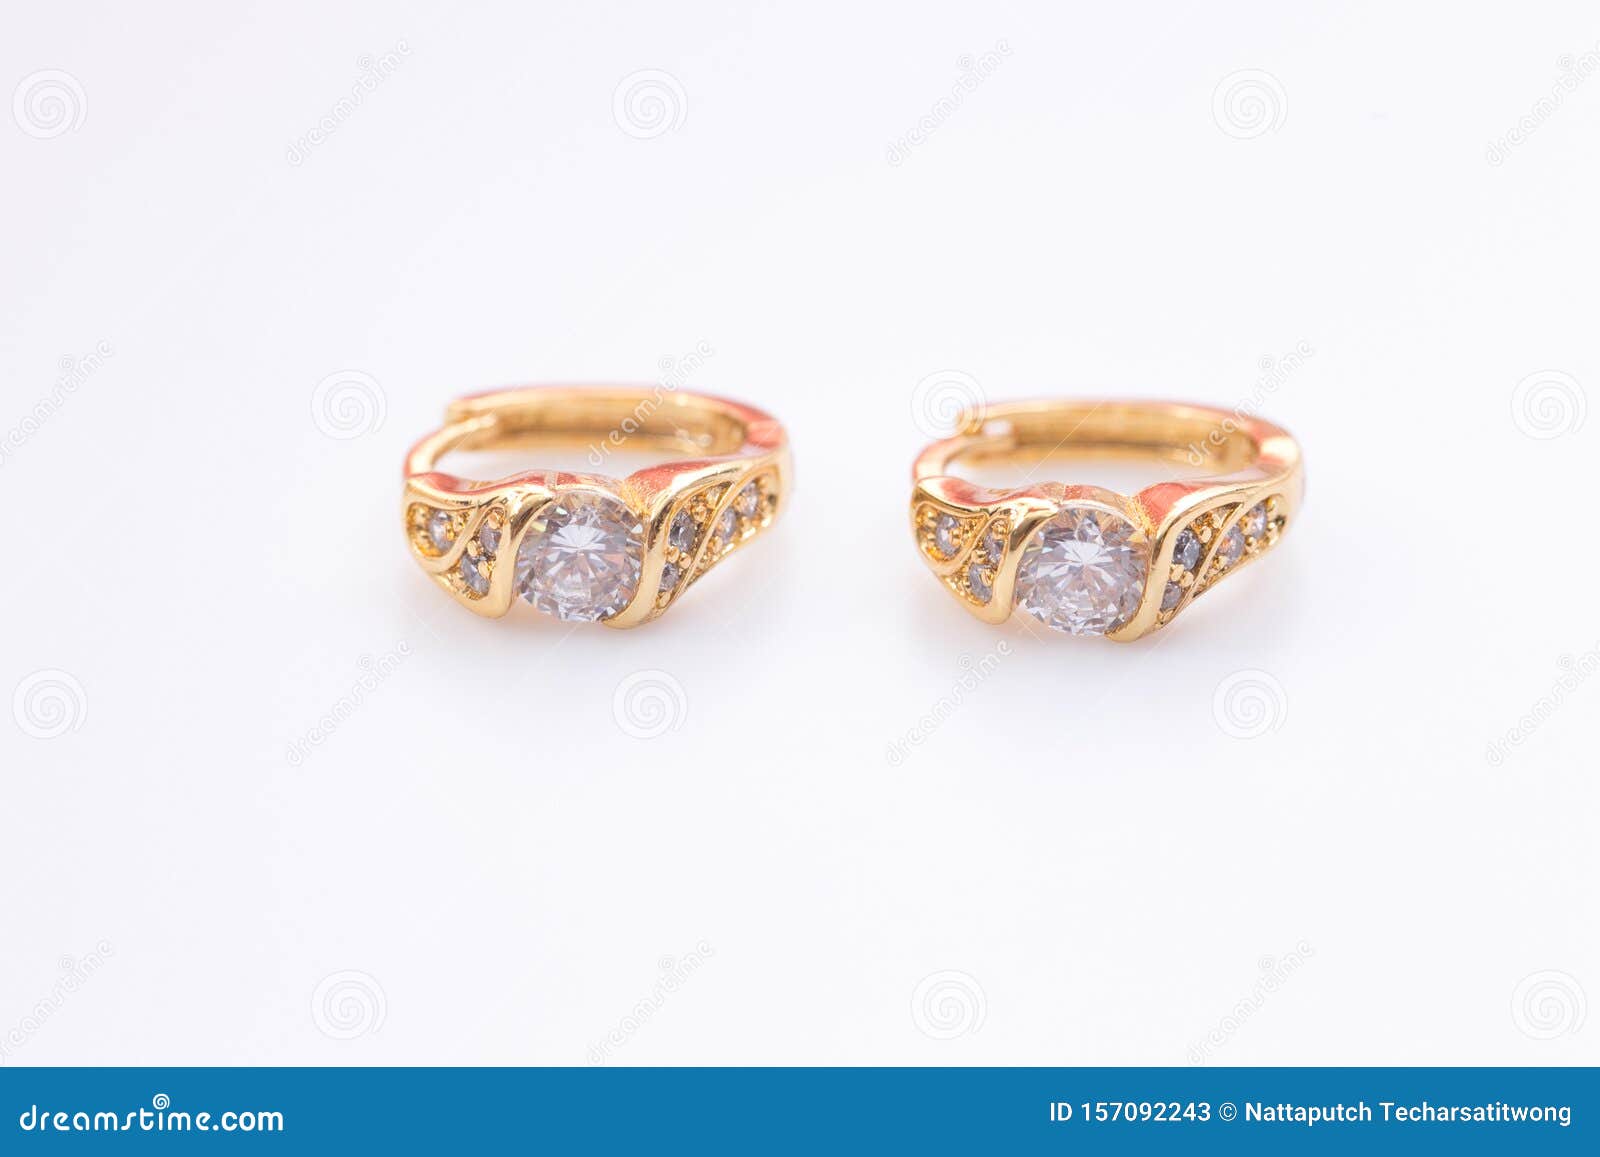 Earrings. Gold Hoop Earrings with Diamonds on the White Background ...